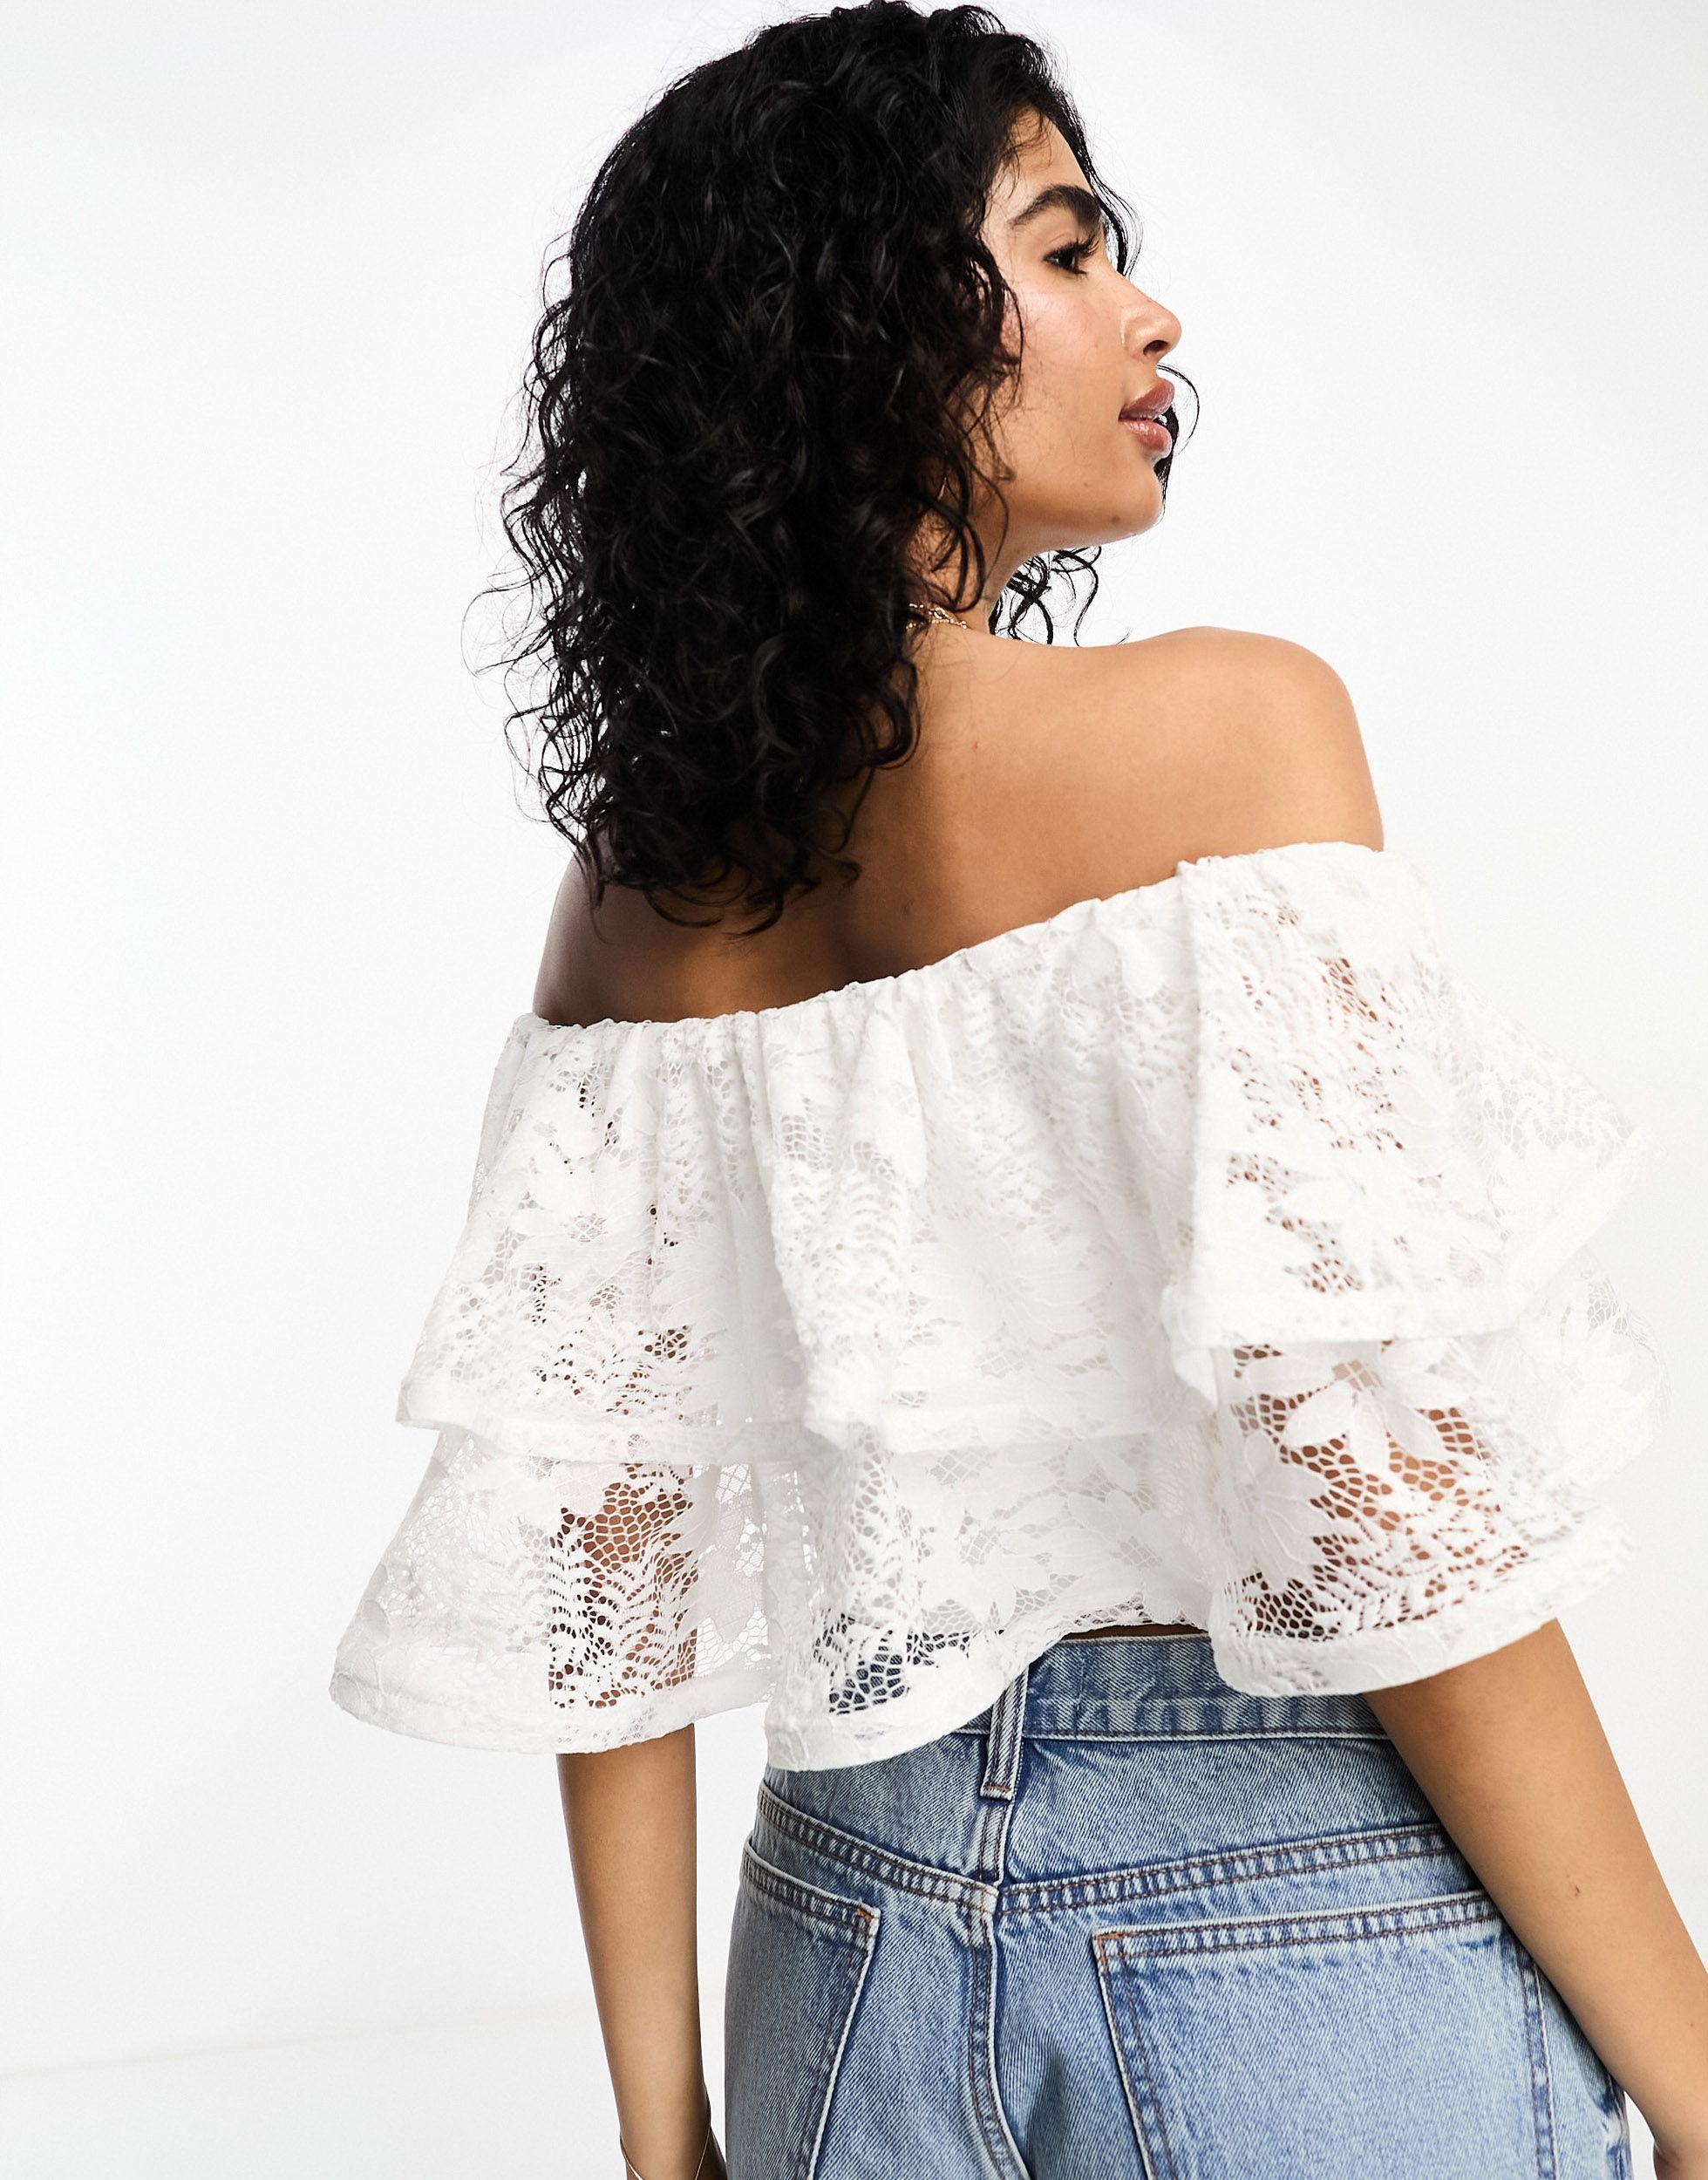 Phobia frivillig Lighed River Island Bandeau Top With Ruffle Lace in White | Lyst